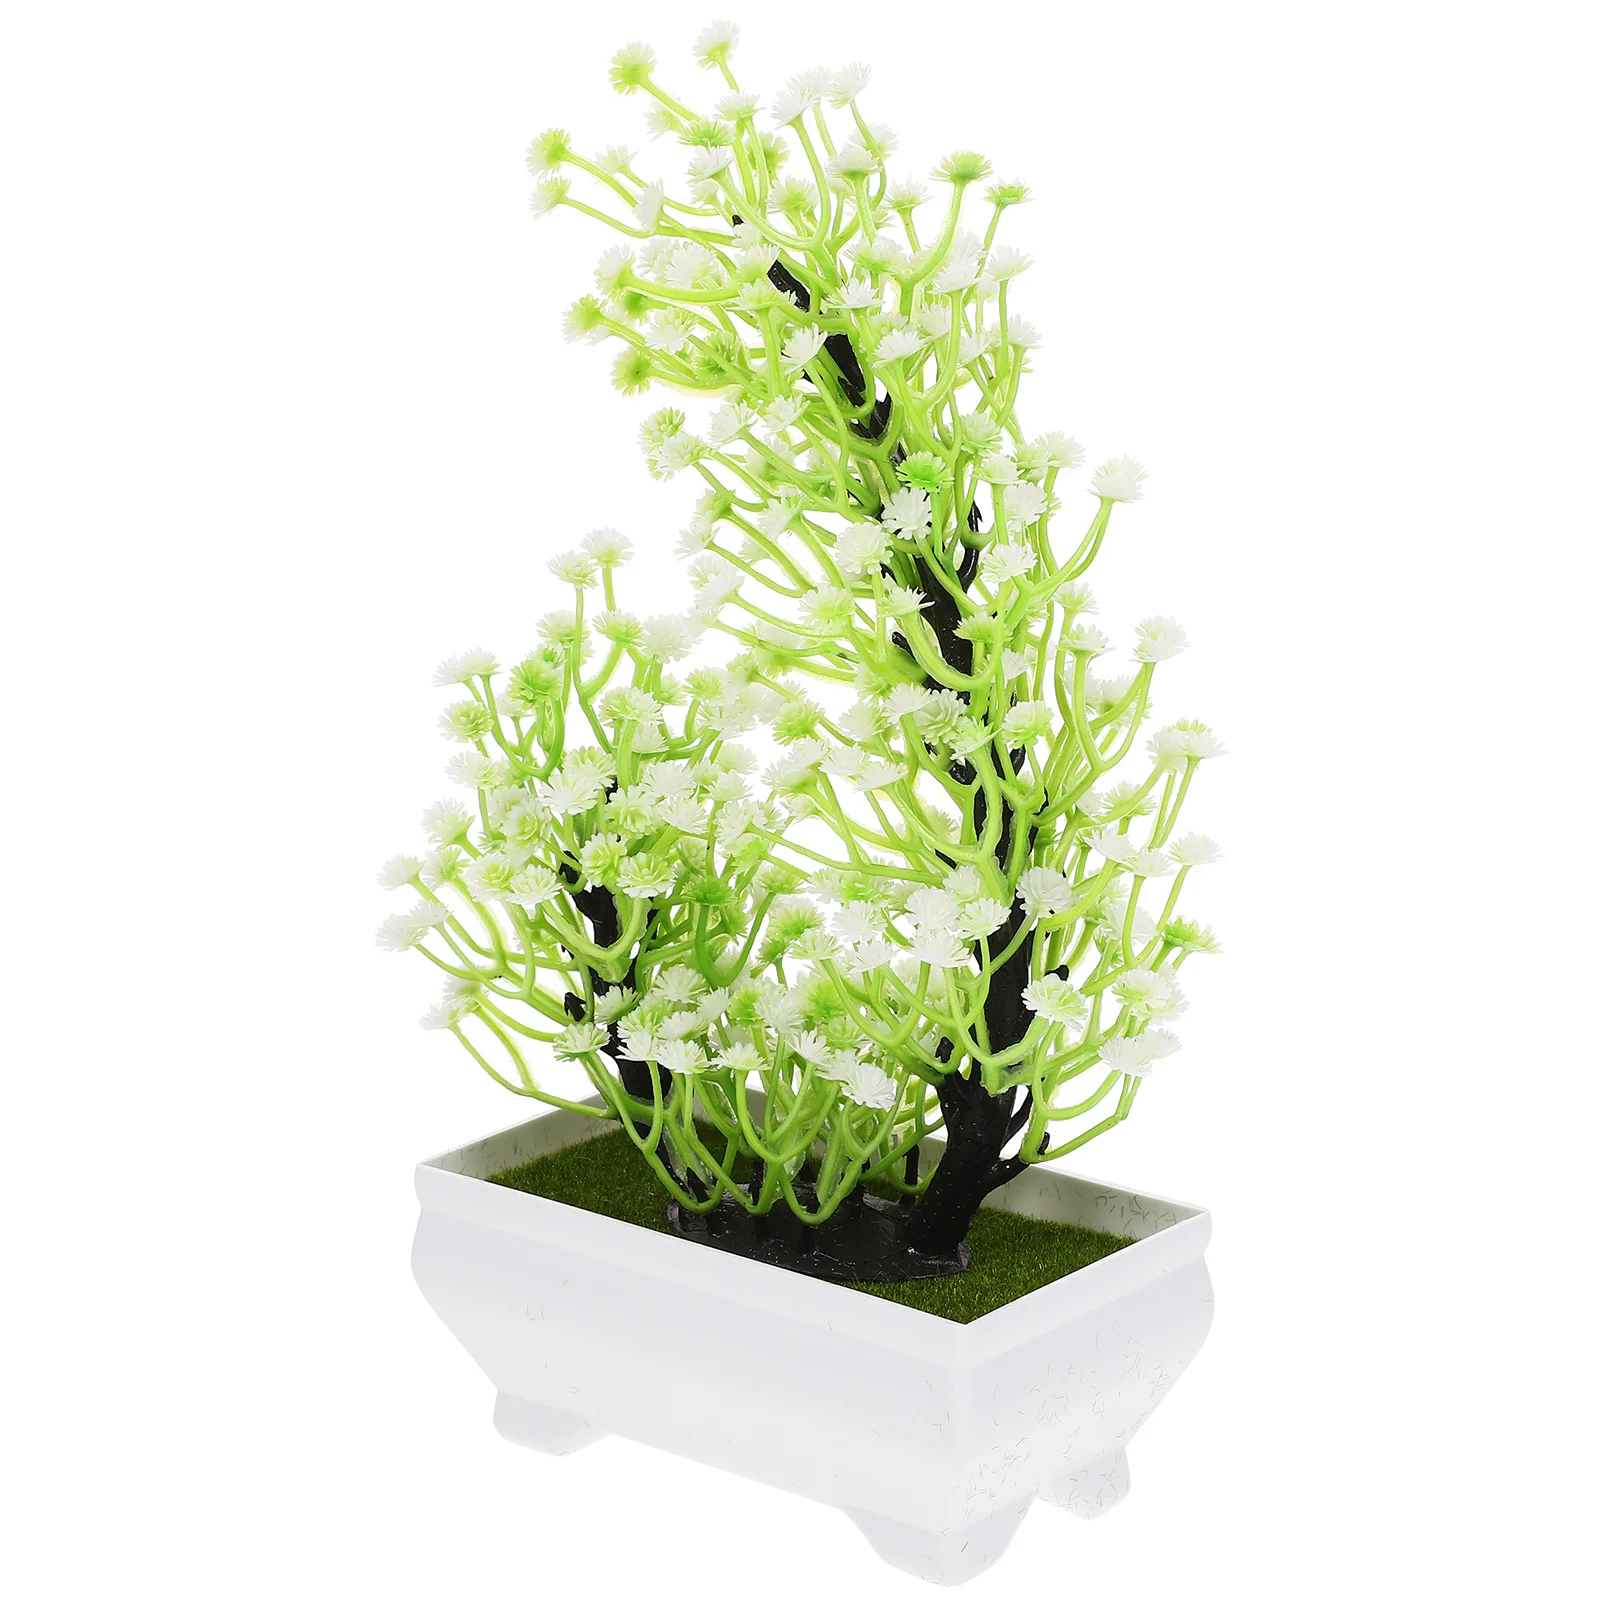 

Artificial Potted Plant Model Plants For Home Decor Indoor Lifelike Plastic Bonsai Fake Ornament Green Tabletop Flowers